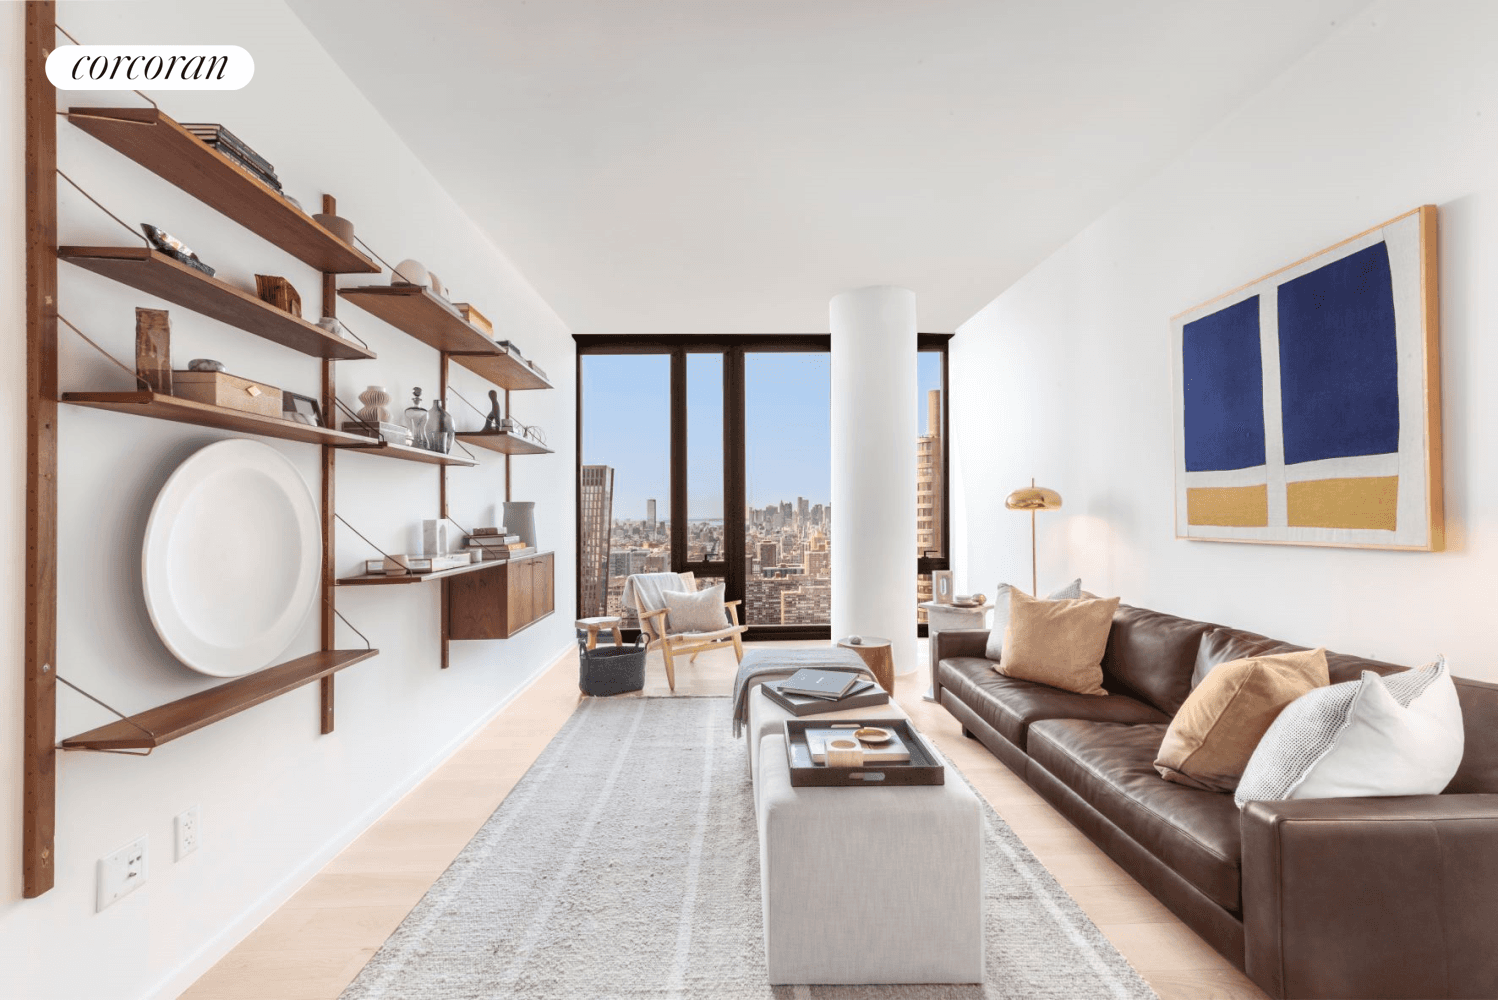 Residence 40D at One United Nations Park is a 3, 831sf four bedroom, four and a half bathroom, Duplex residence with a dramatic double height great room and ceilings soaring ...